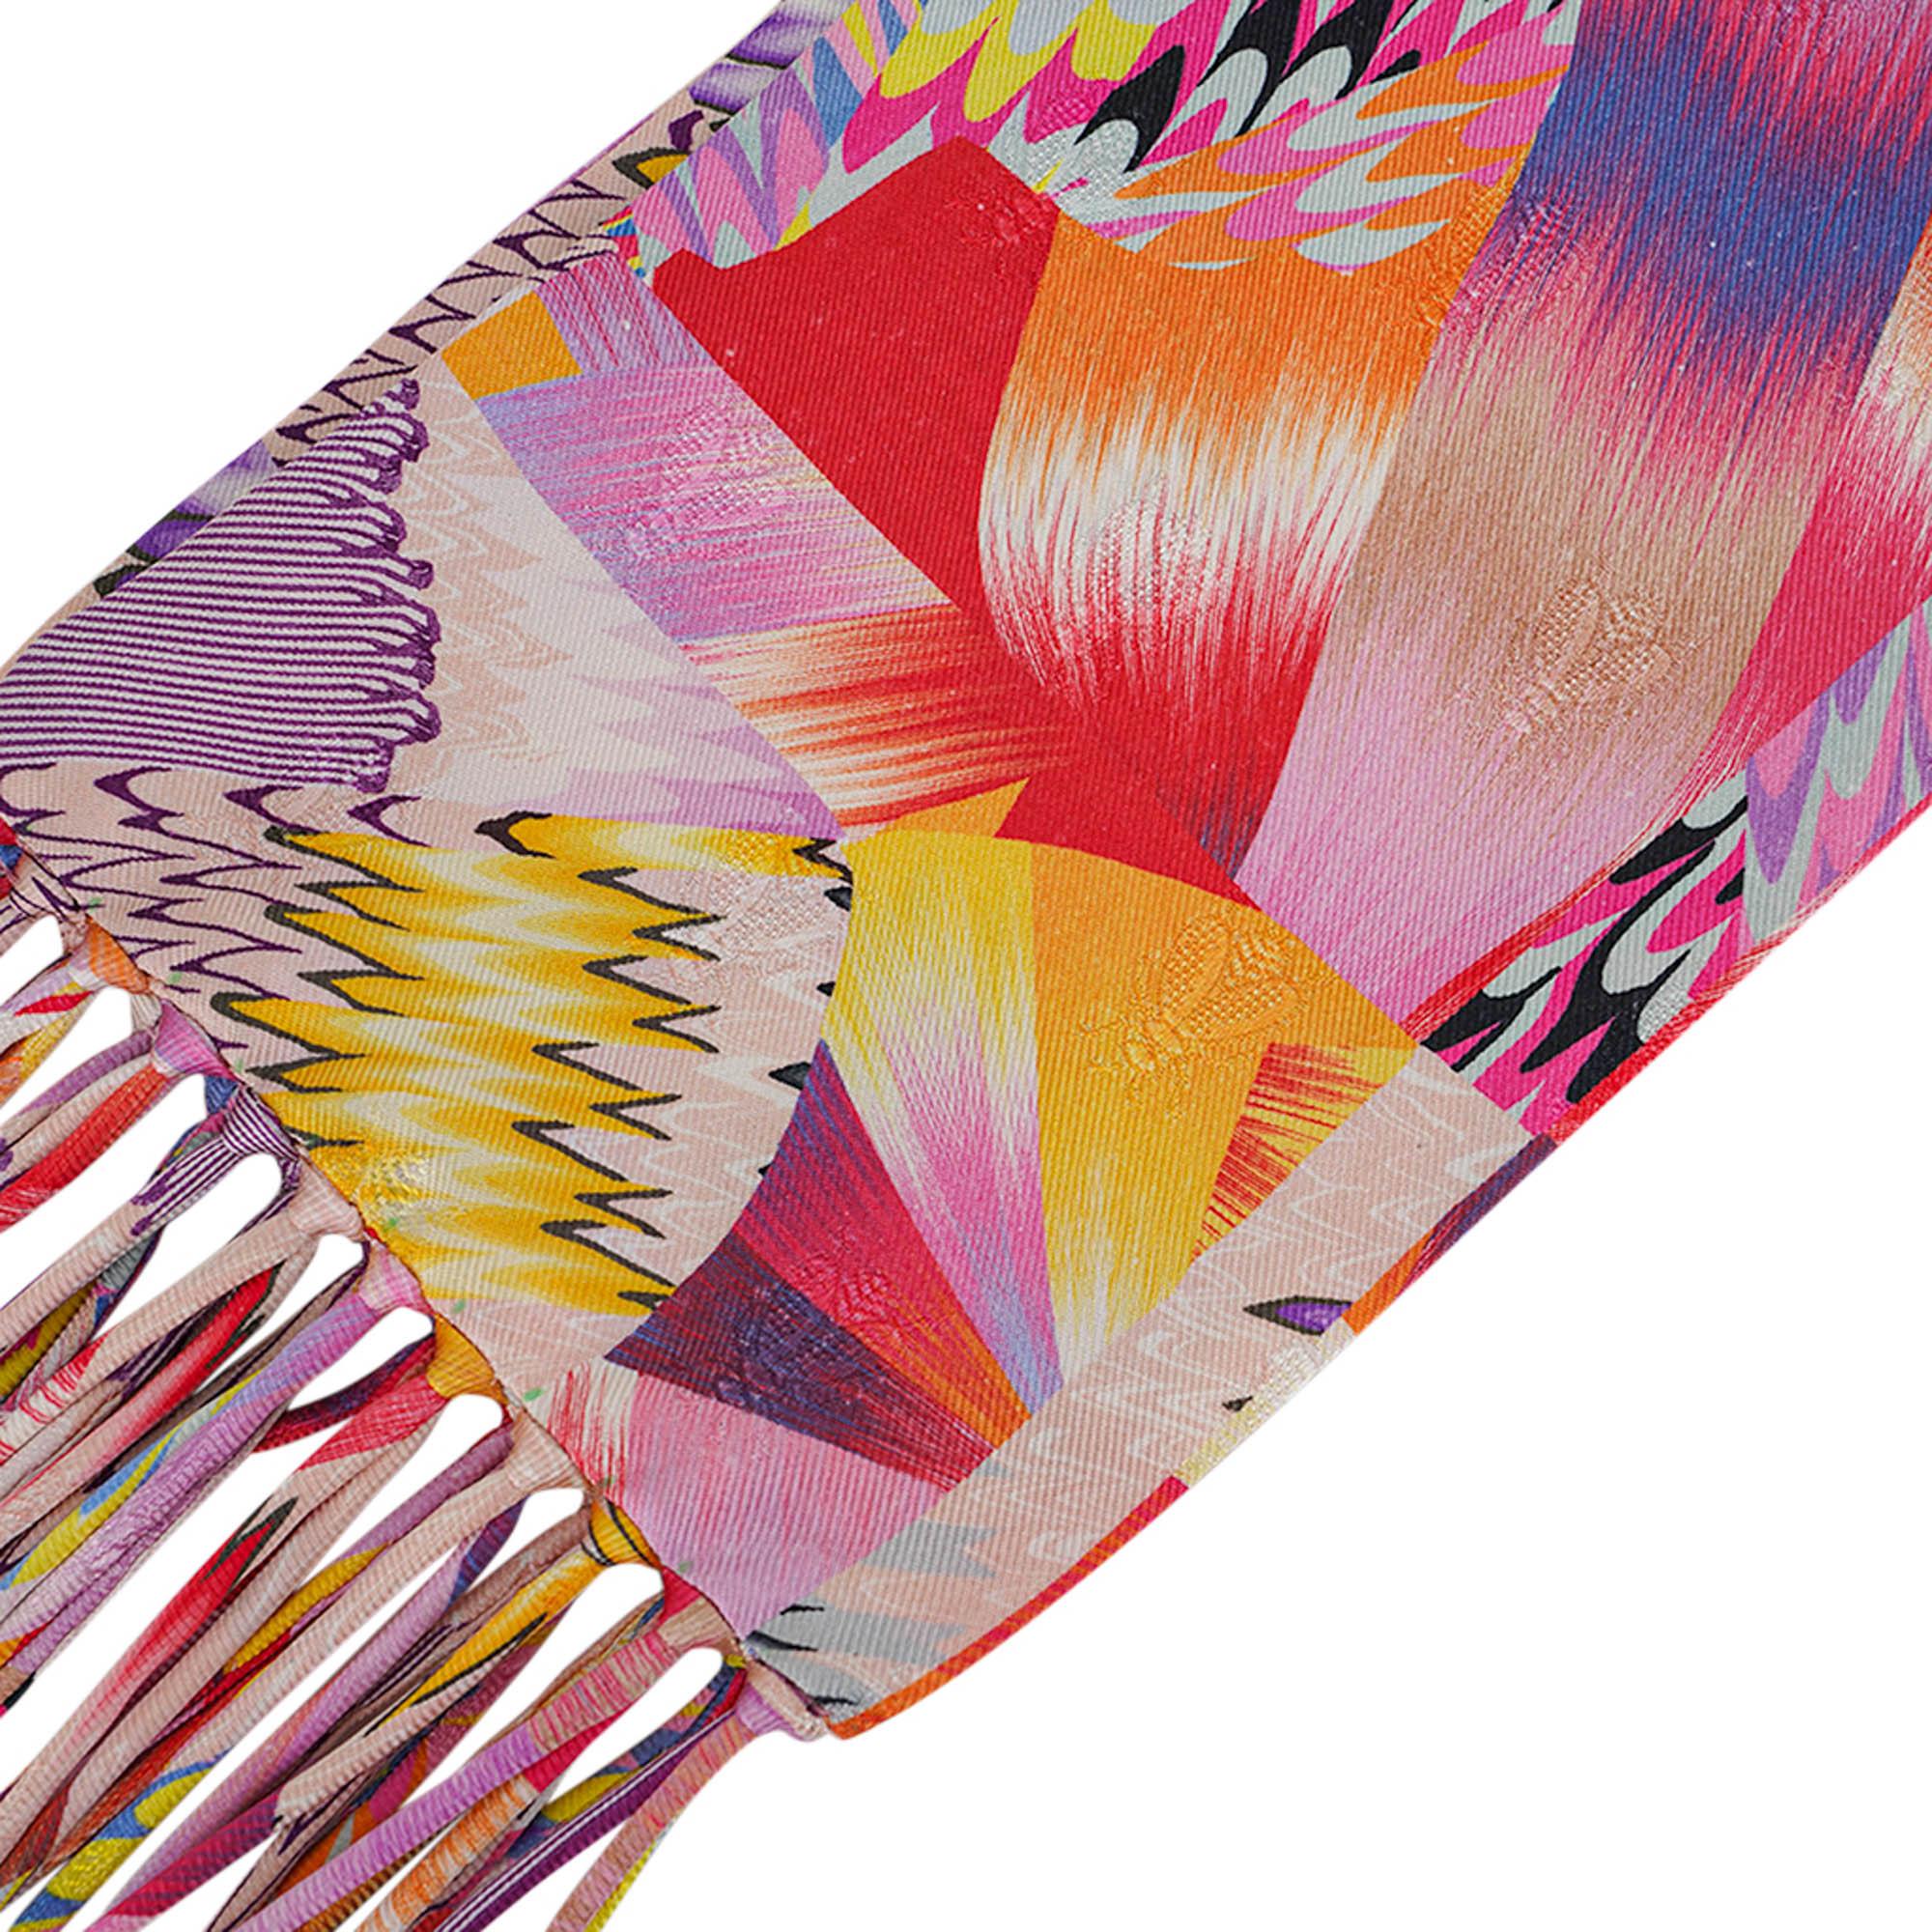 Mightychic offer a Limited Edition Hermes Marble Silk Muffler featured in Rose Multicolore.
Hand rolled scarf and spaghetti fringes.
This exquisite scarf is a must have for any Hermes collector.
Created by an art almost lost to the world it brings